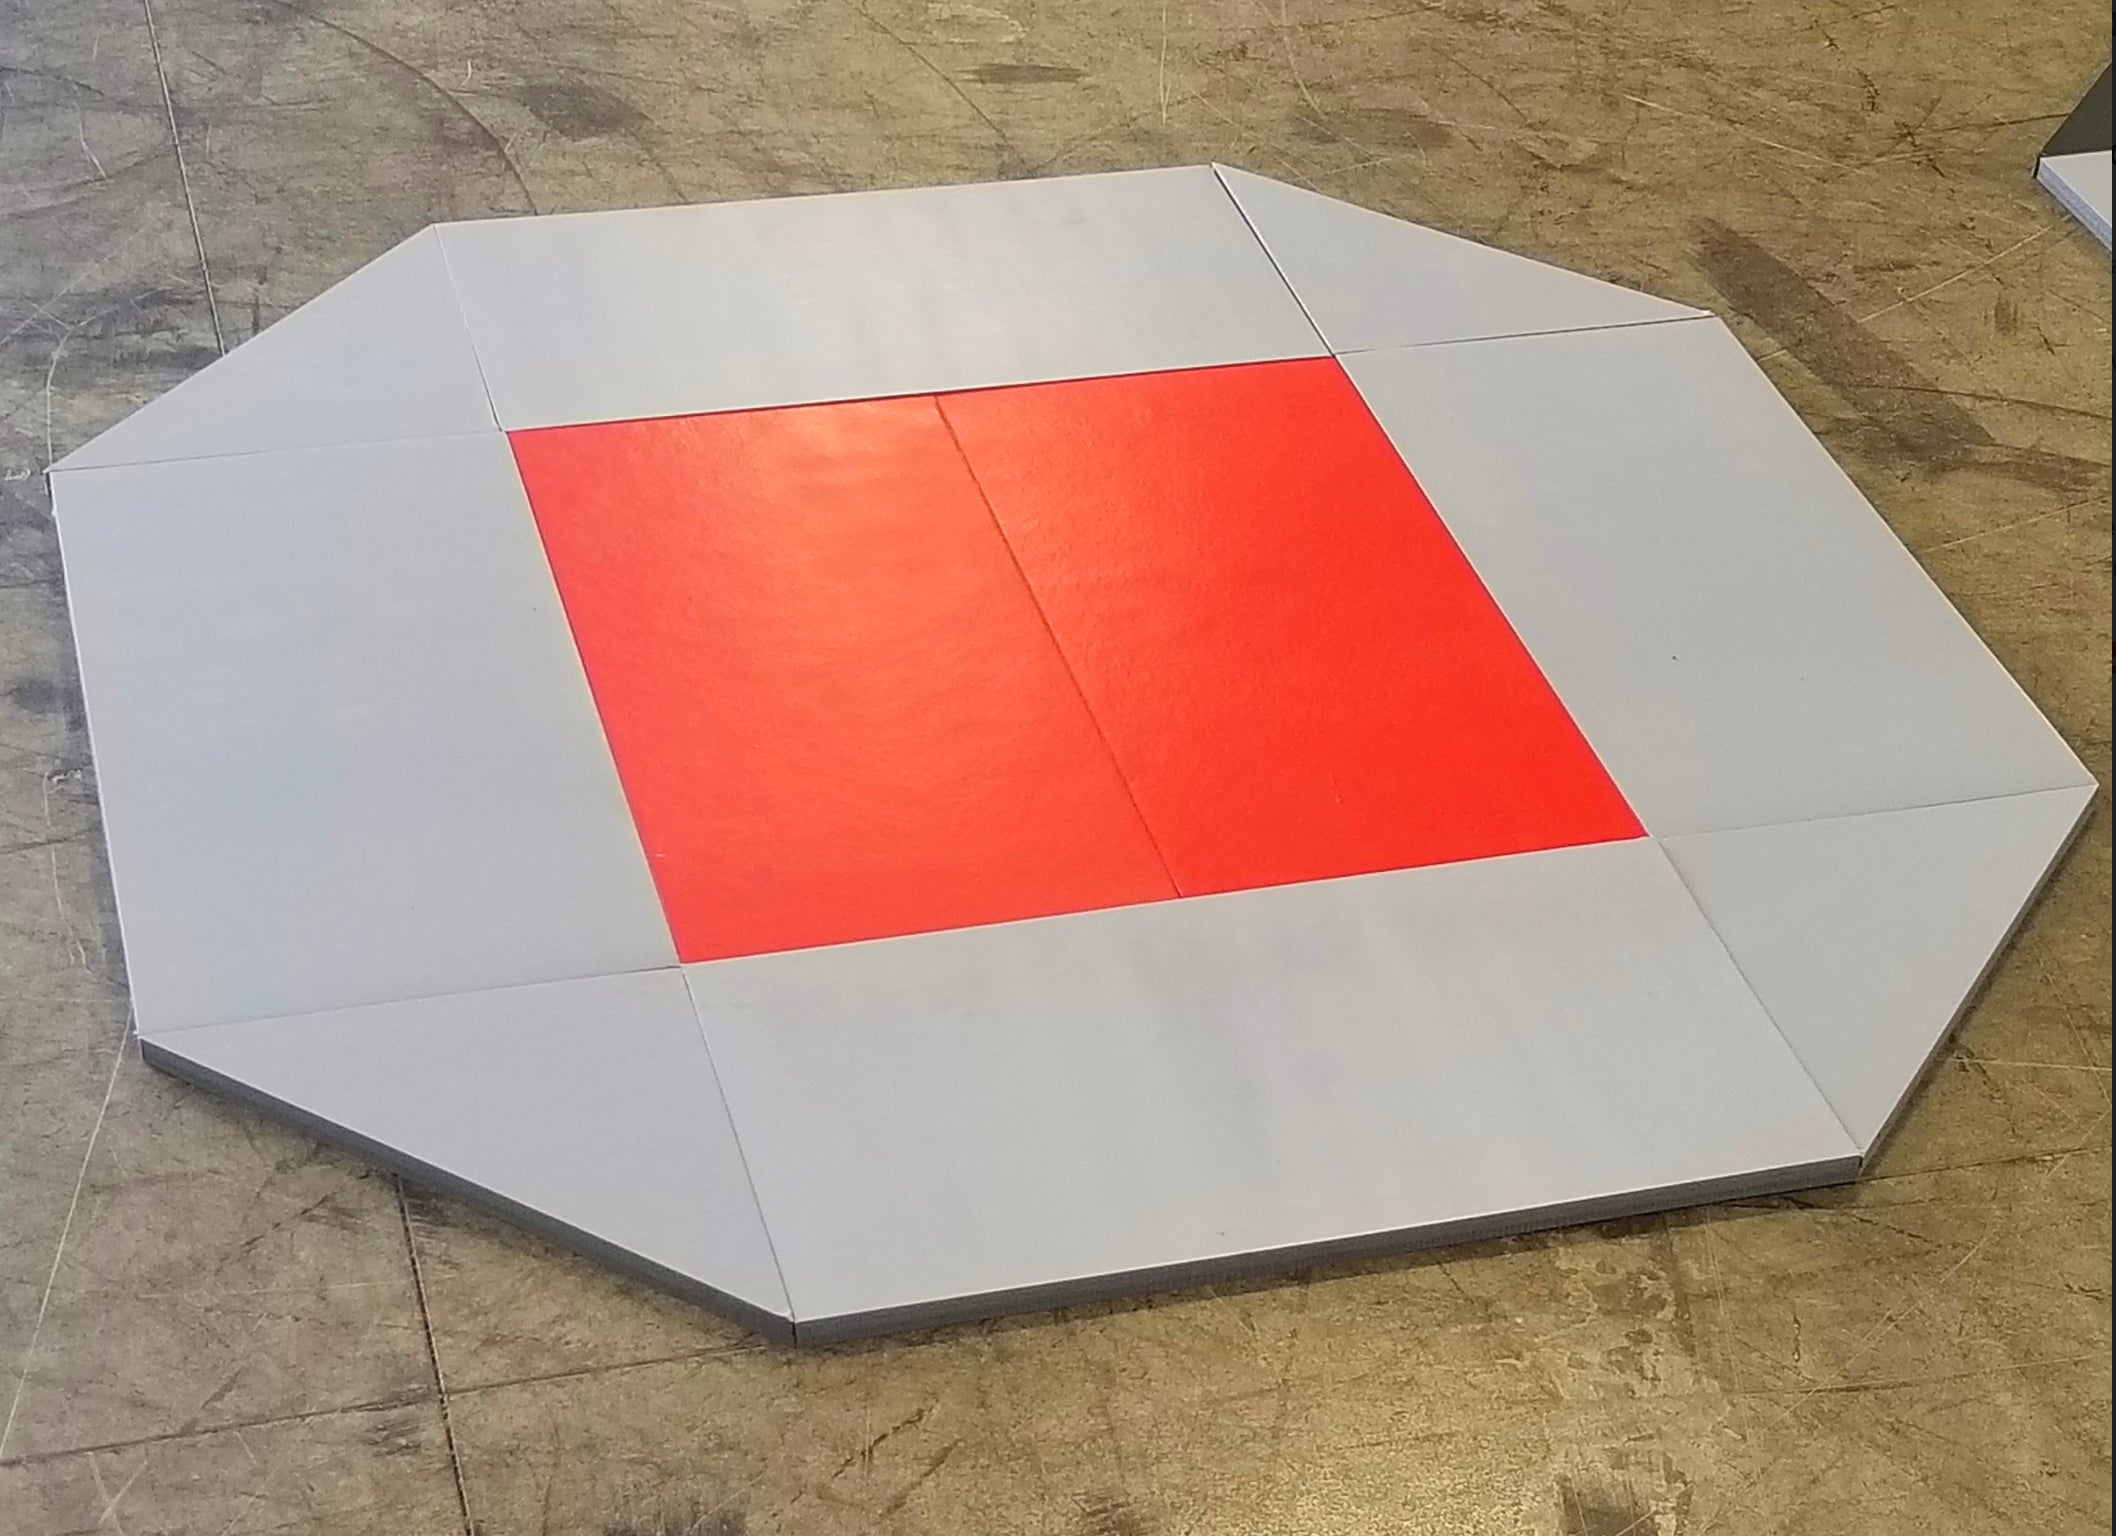 8' x 8' remnant octagon wrestling mat Gray and Red Vinyl